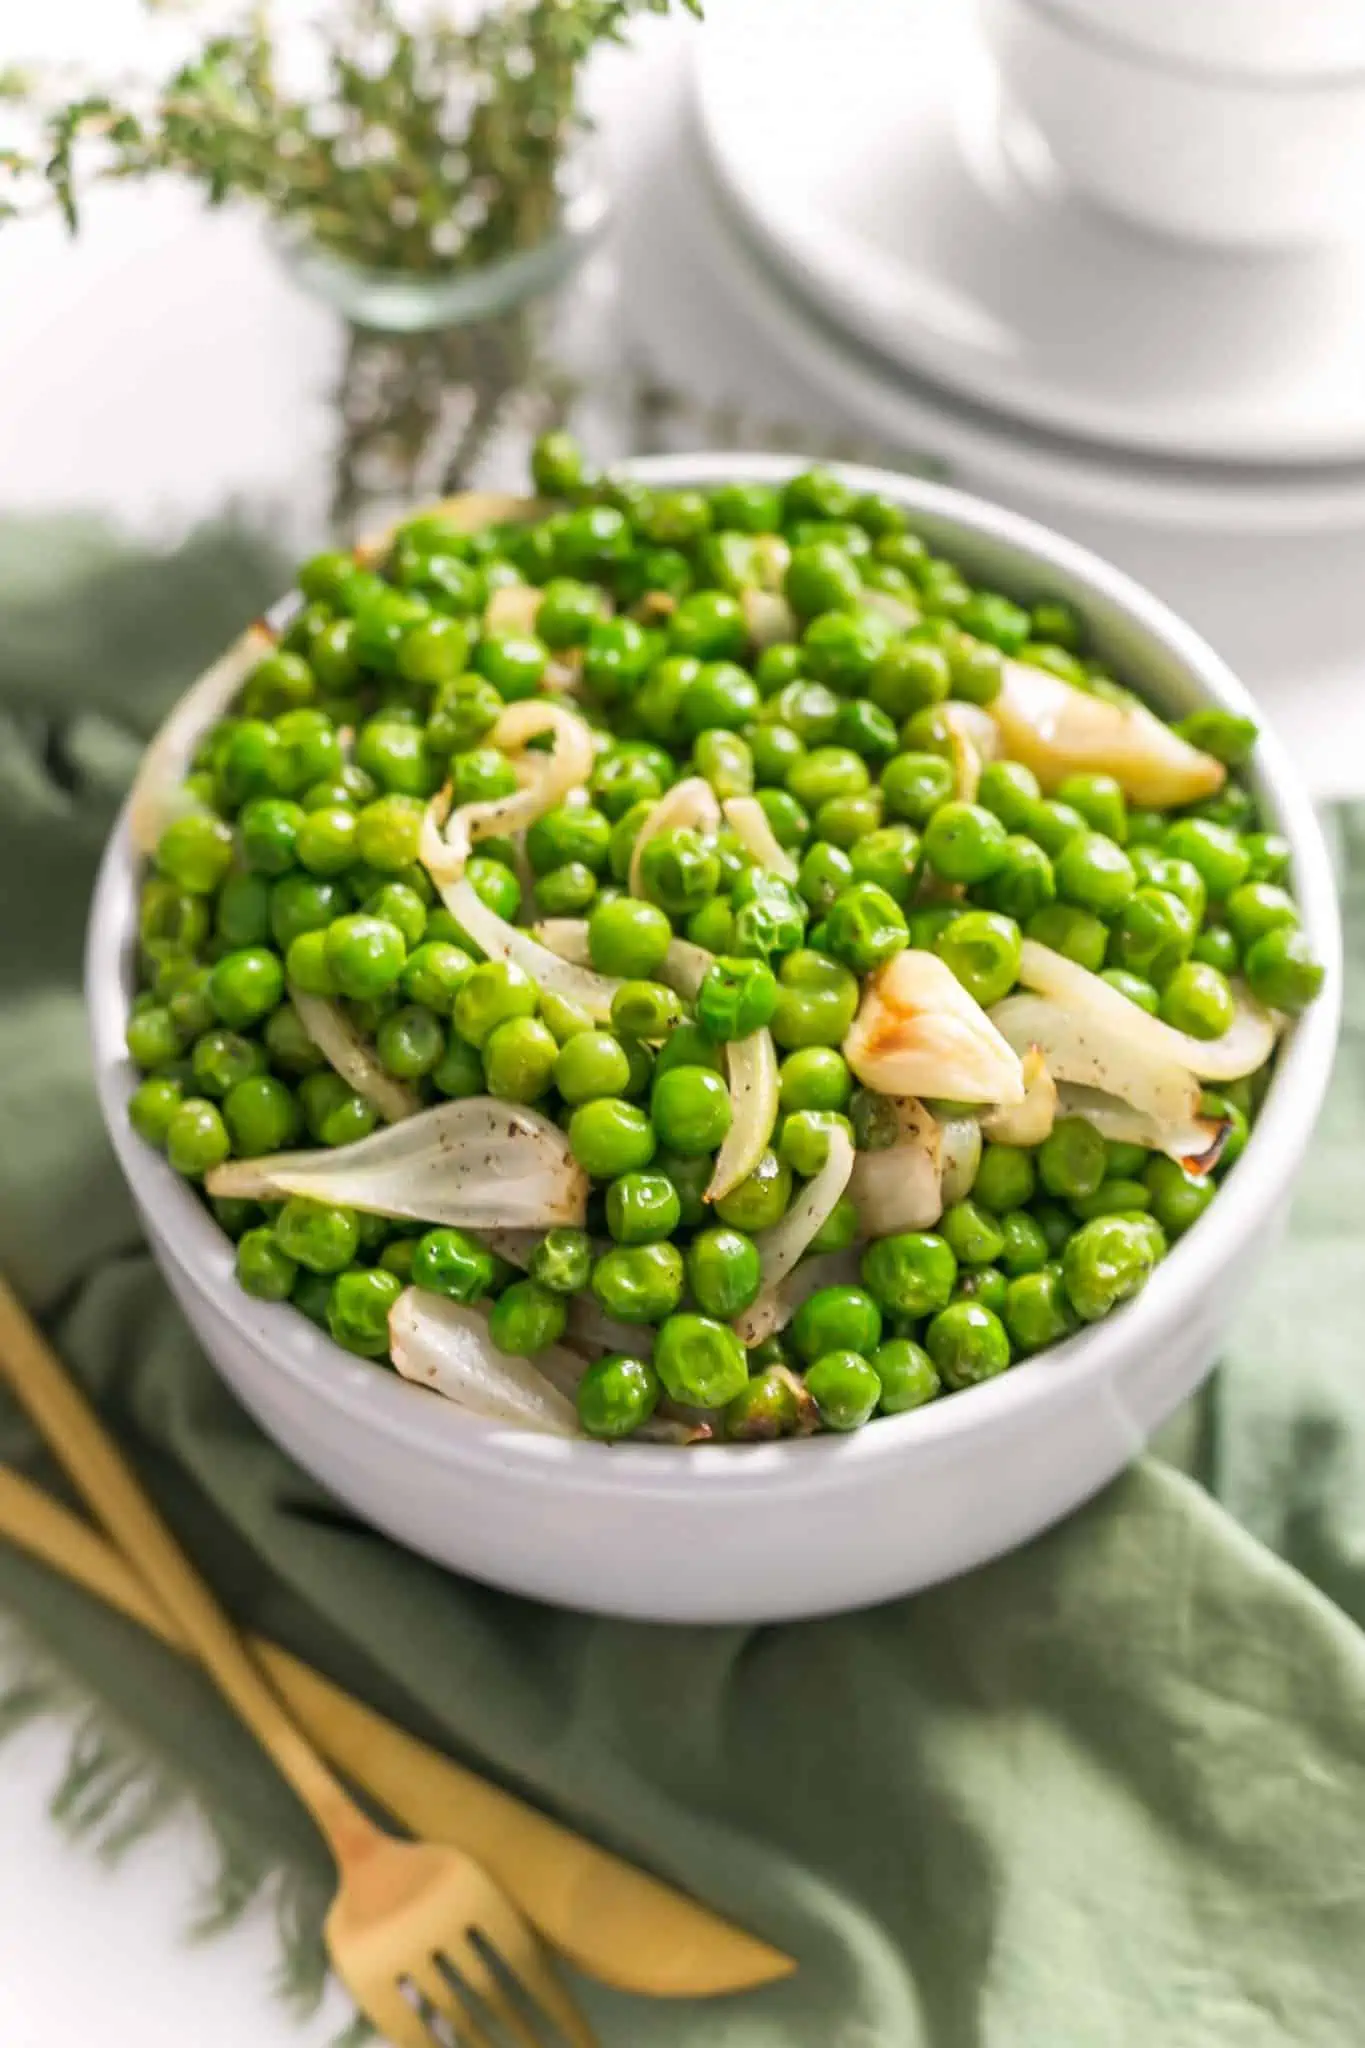 Large white bowl of peas with onions on a green cloth